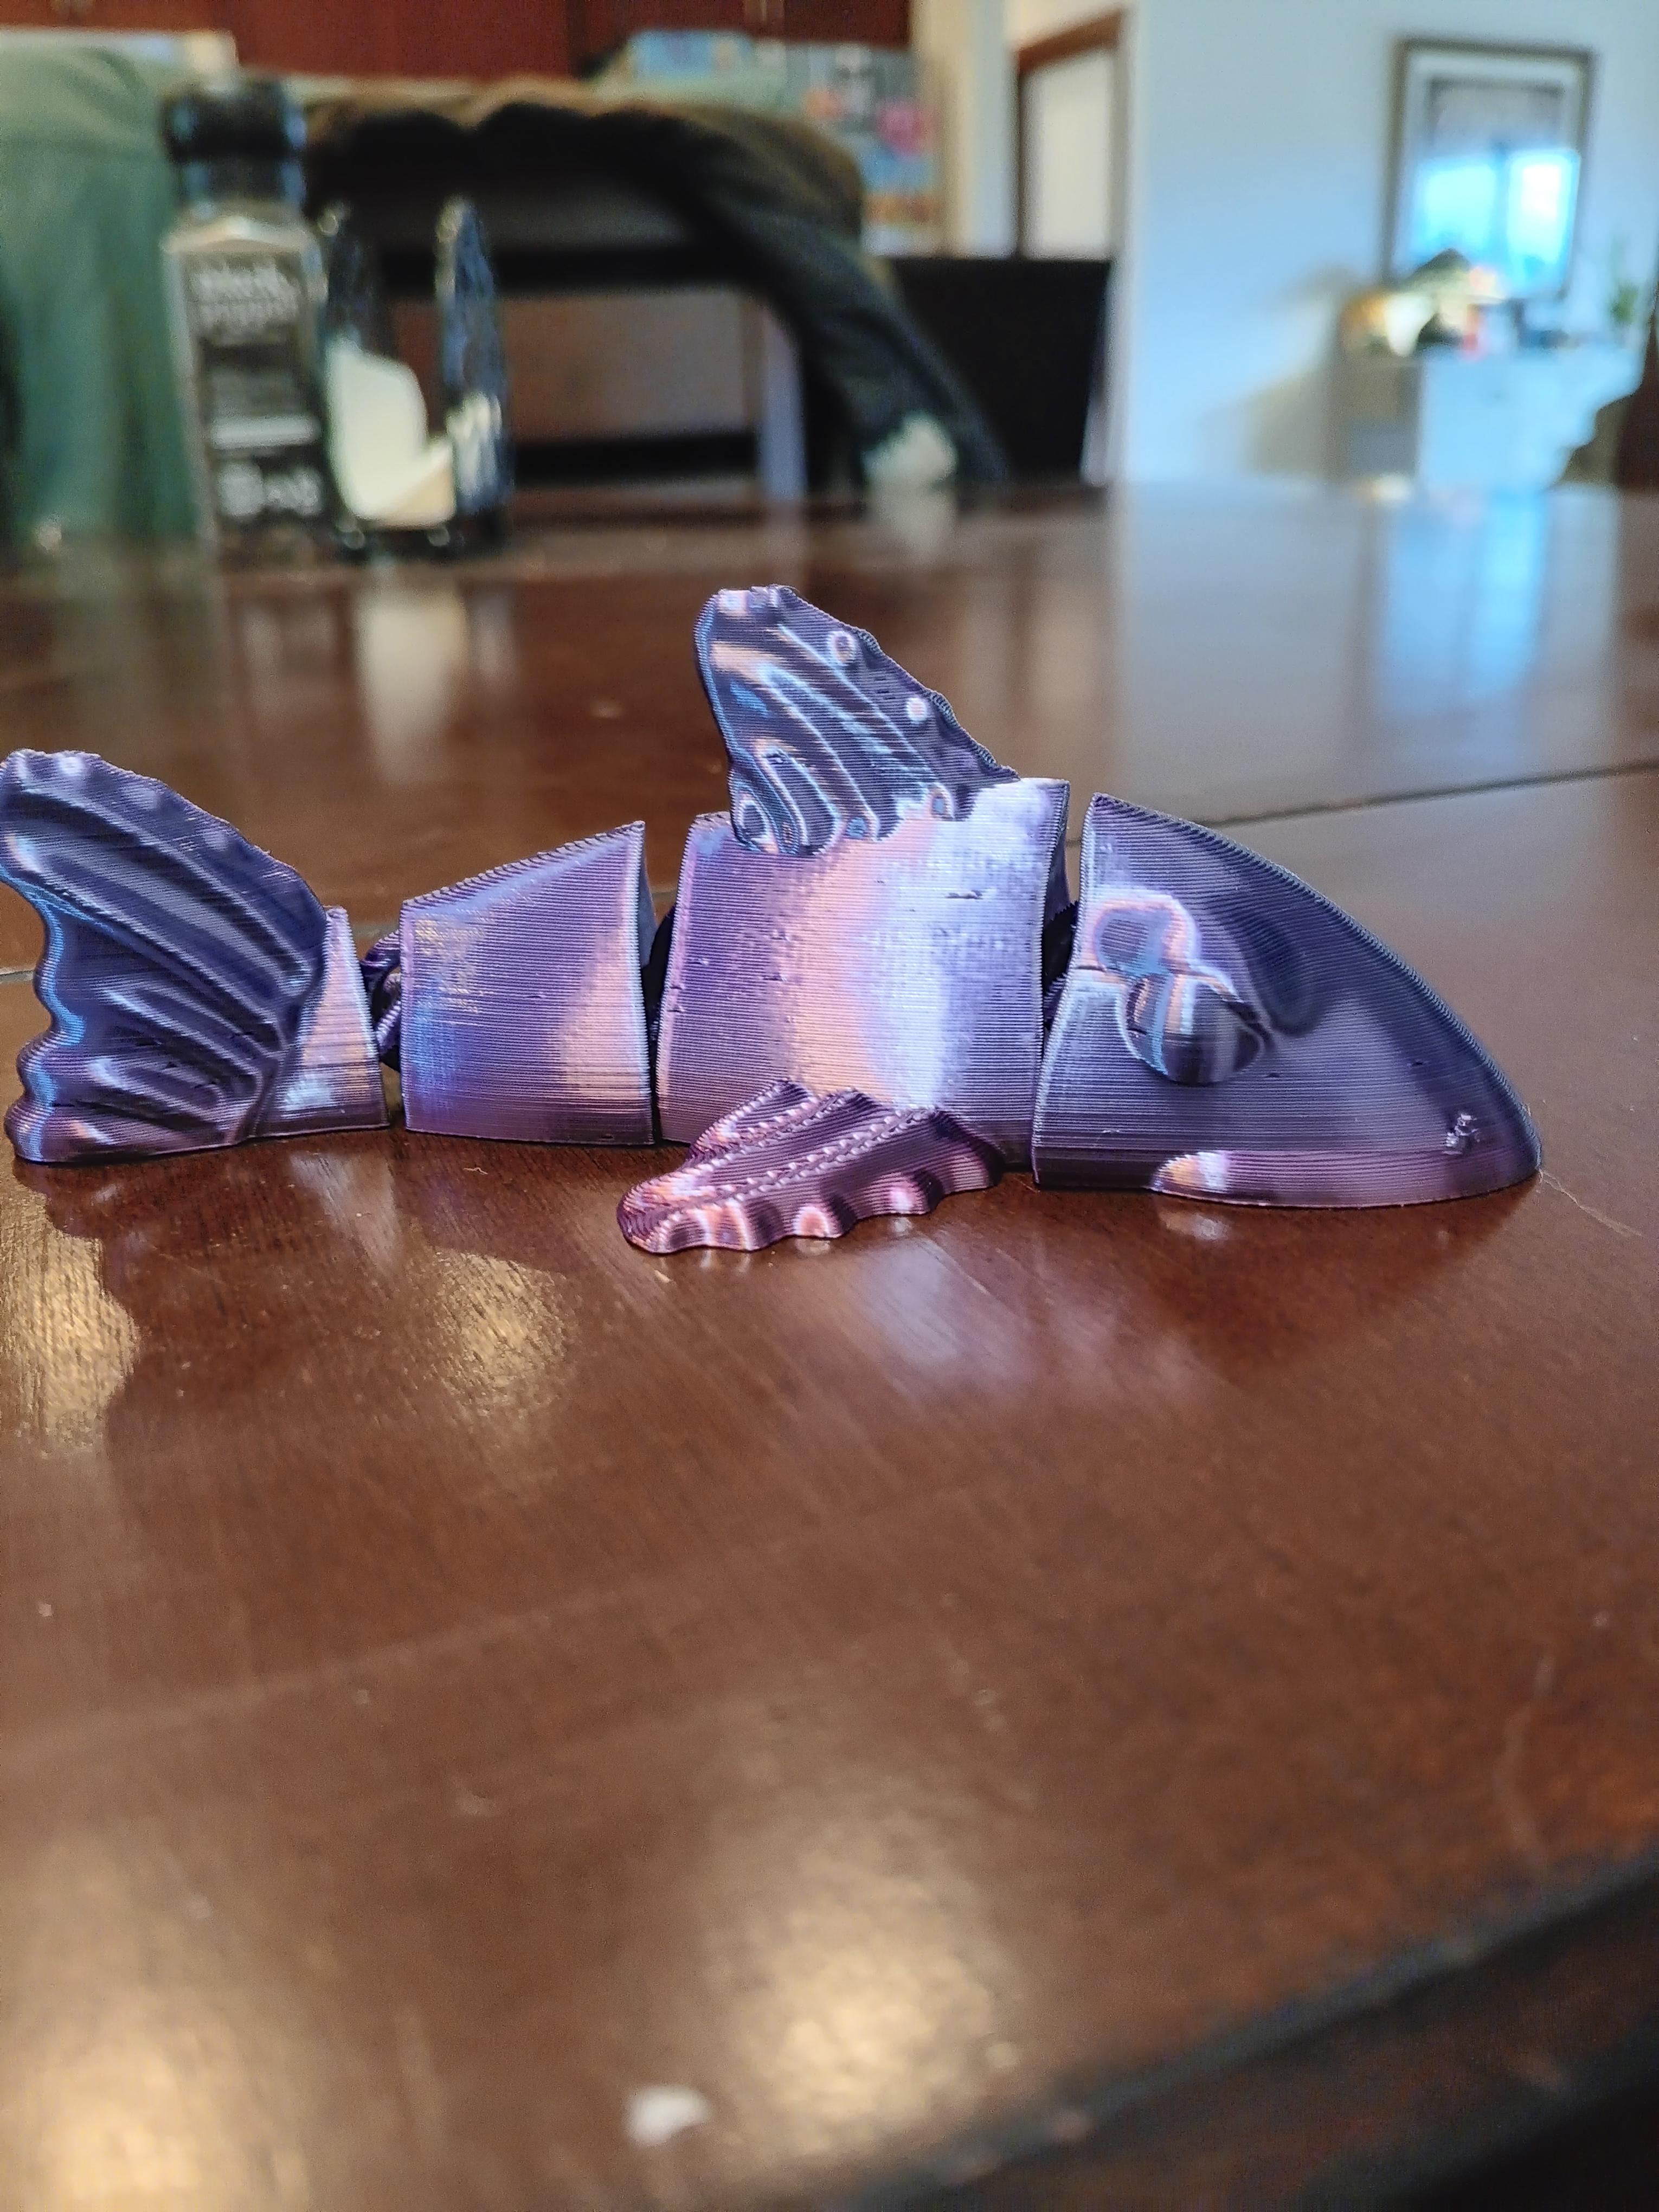 Flexi angry Koi fish - print in place - fidget toy 3d model